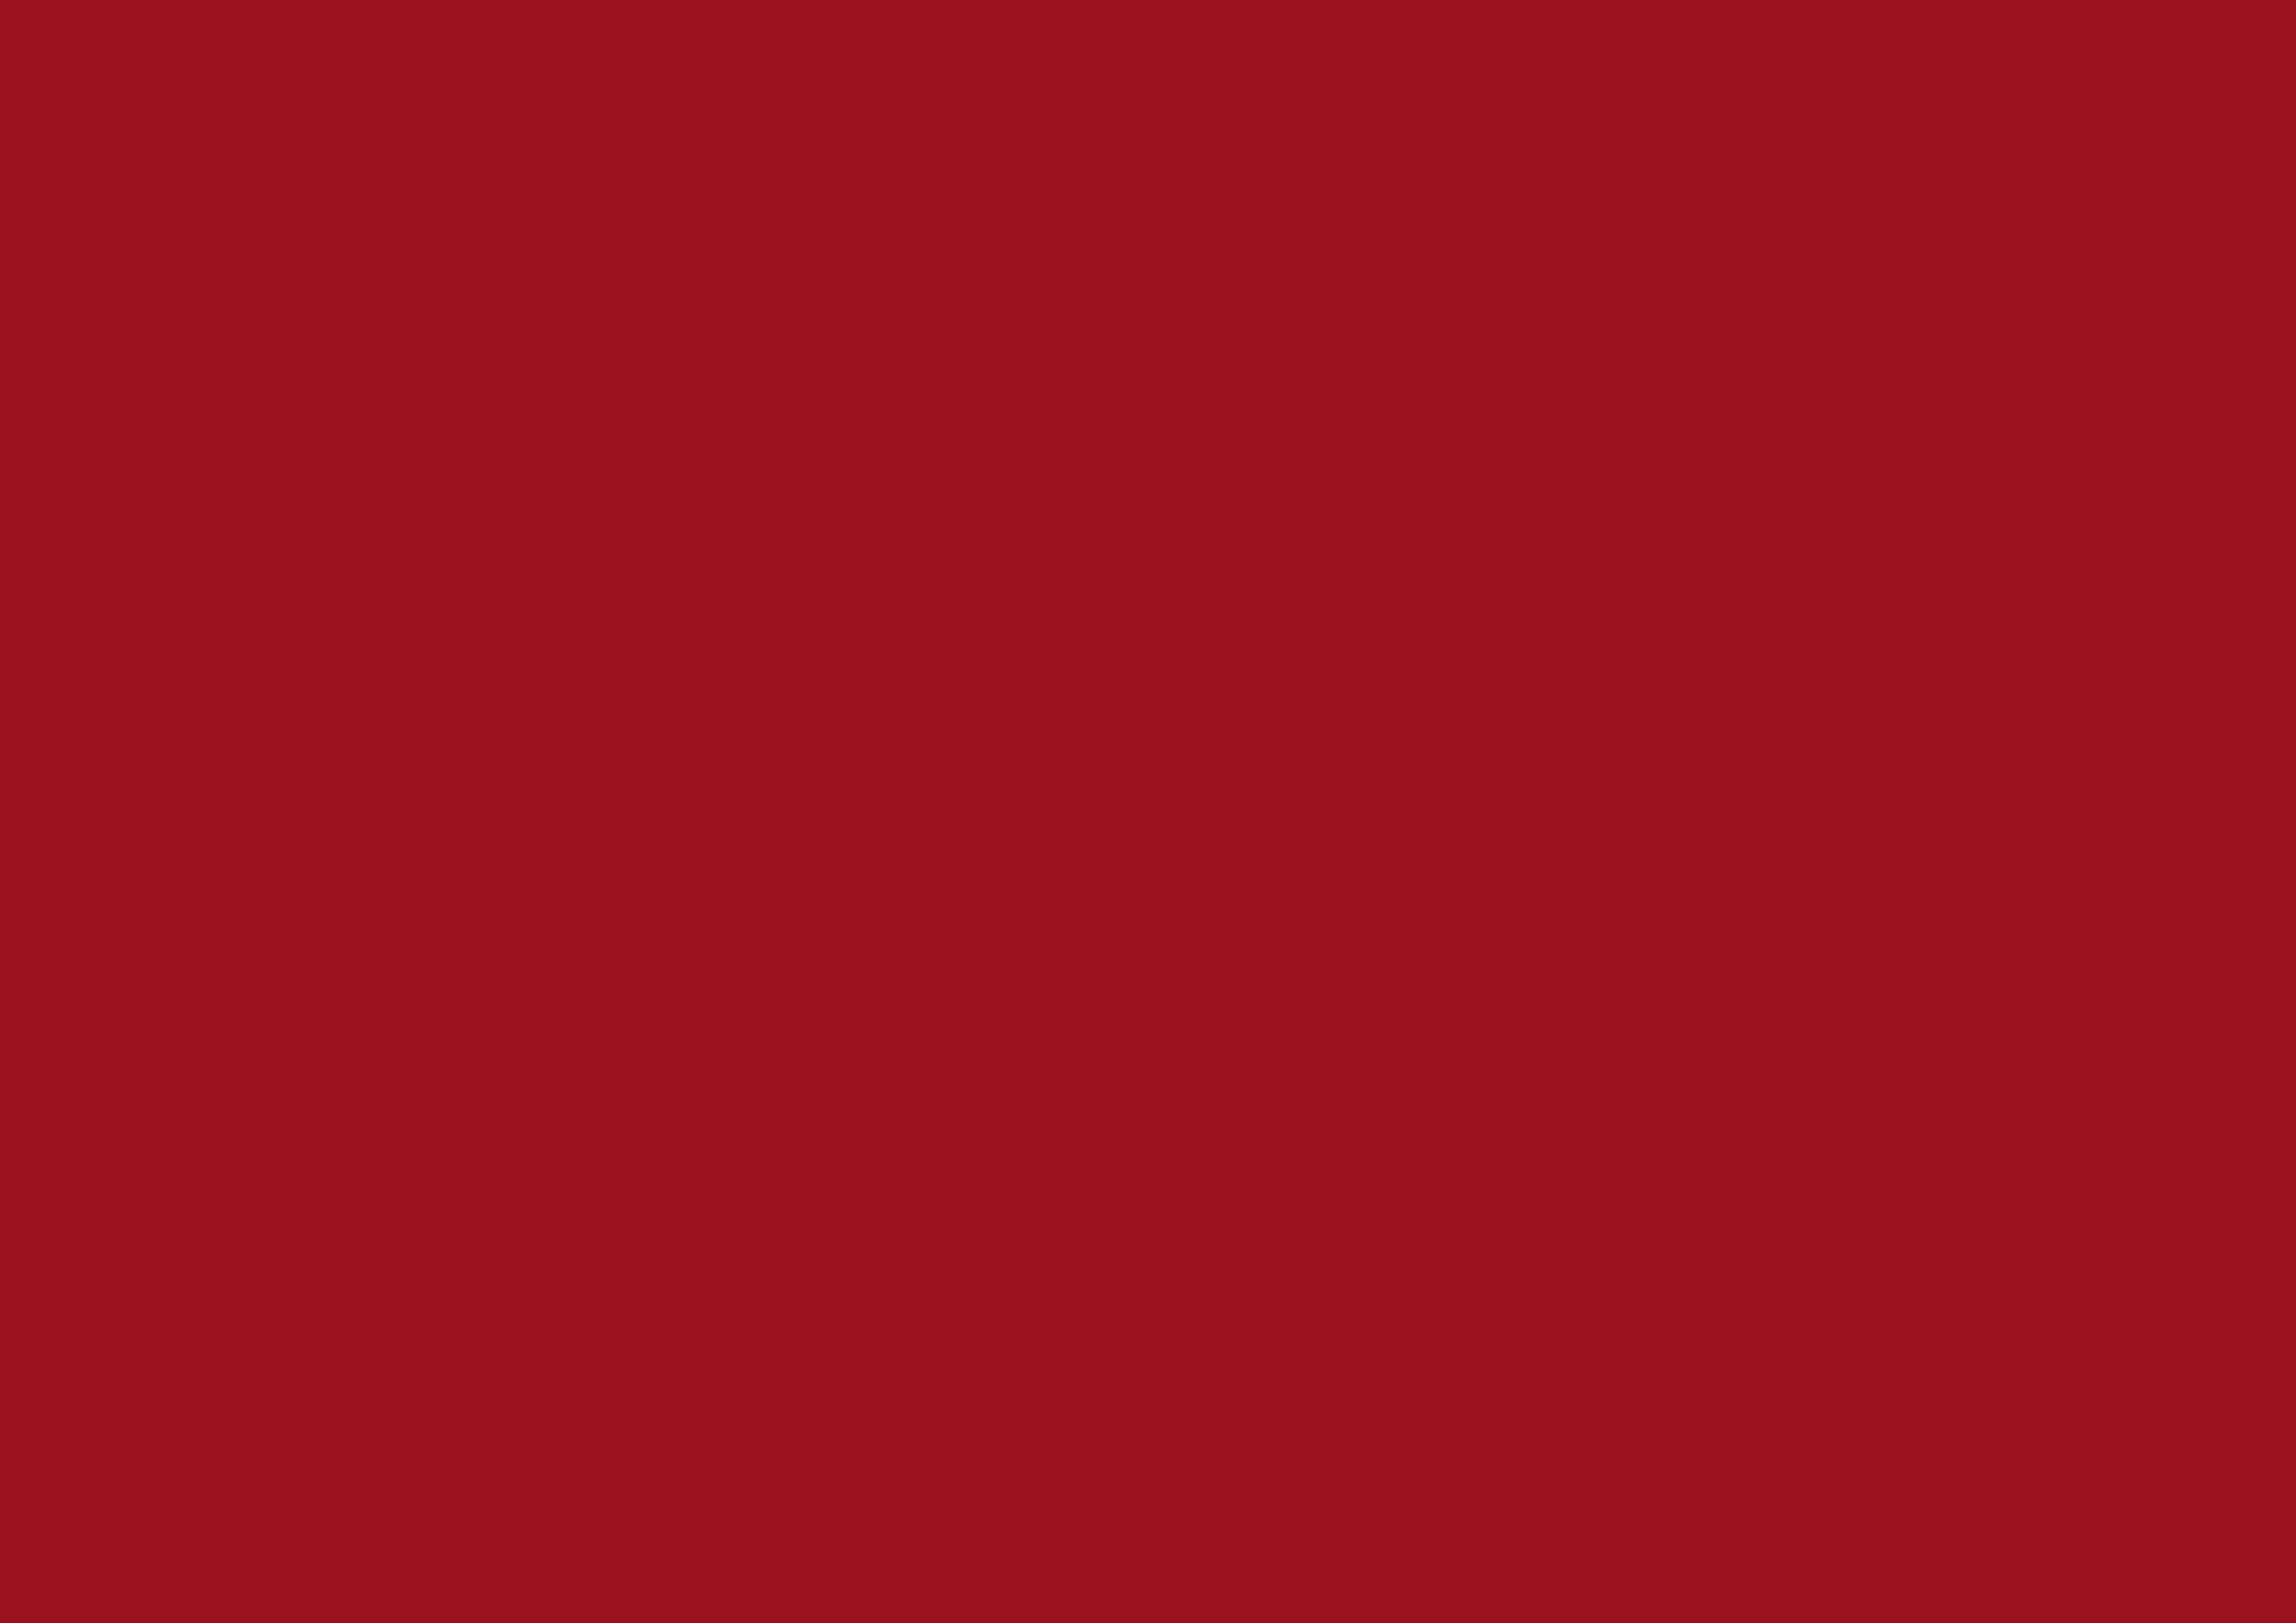 3508x2480 Ruby Red Solid Color Background